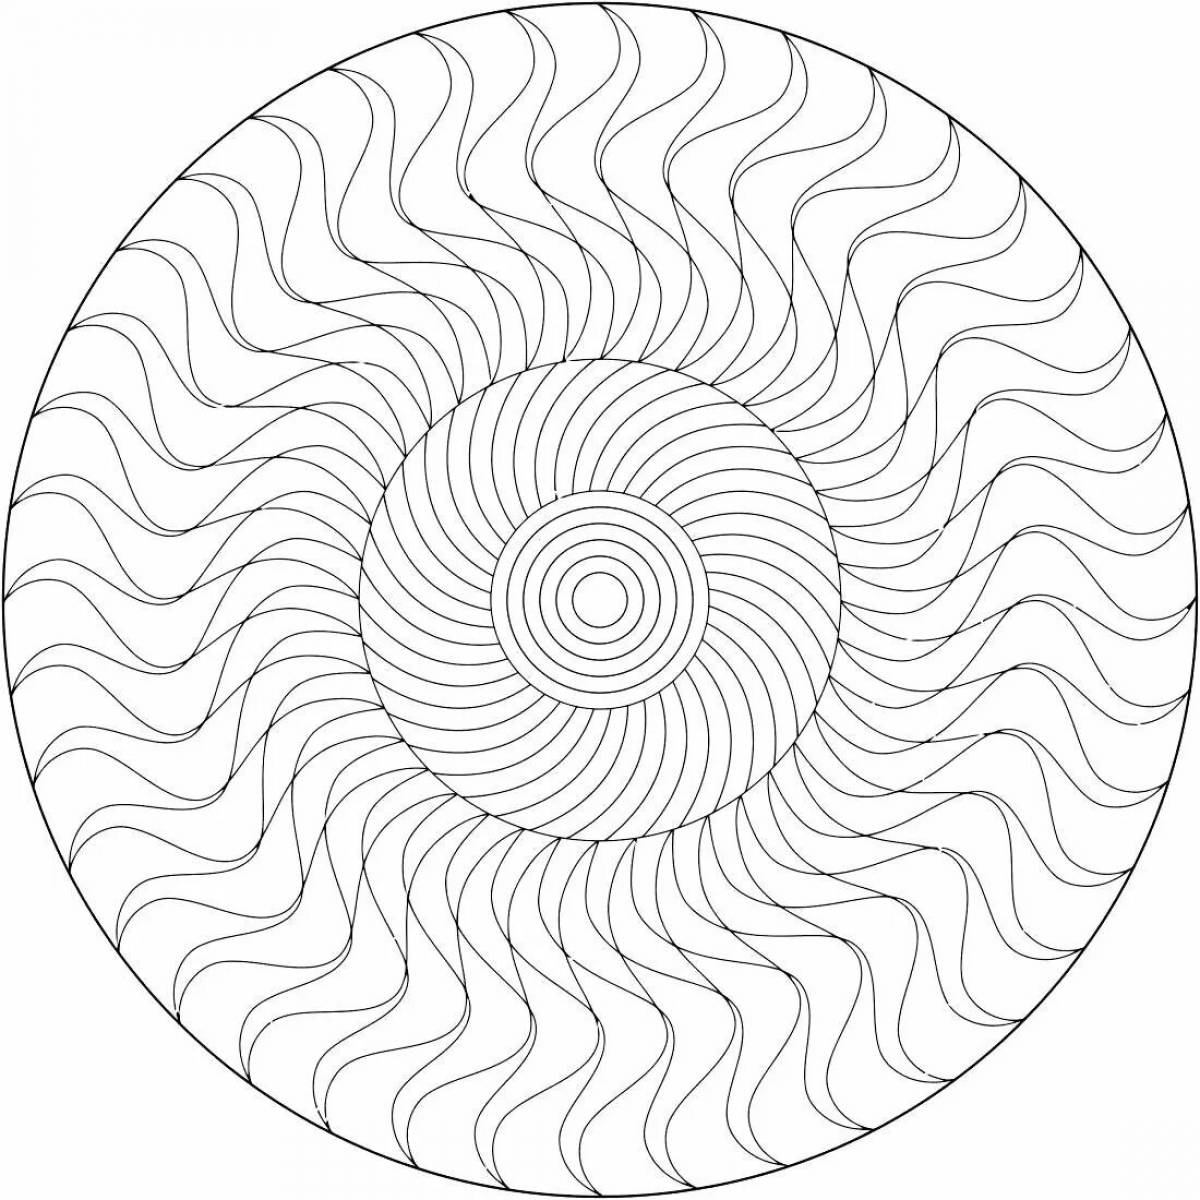 Detailed spiral coloring